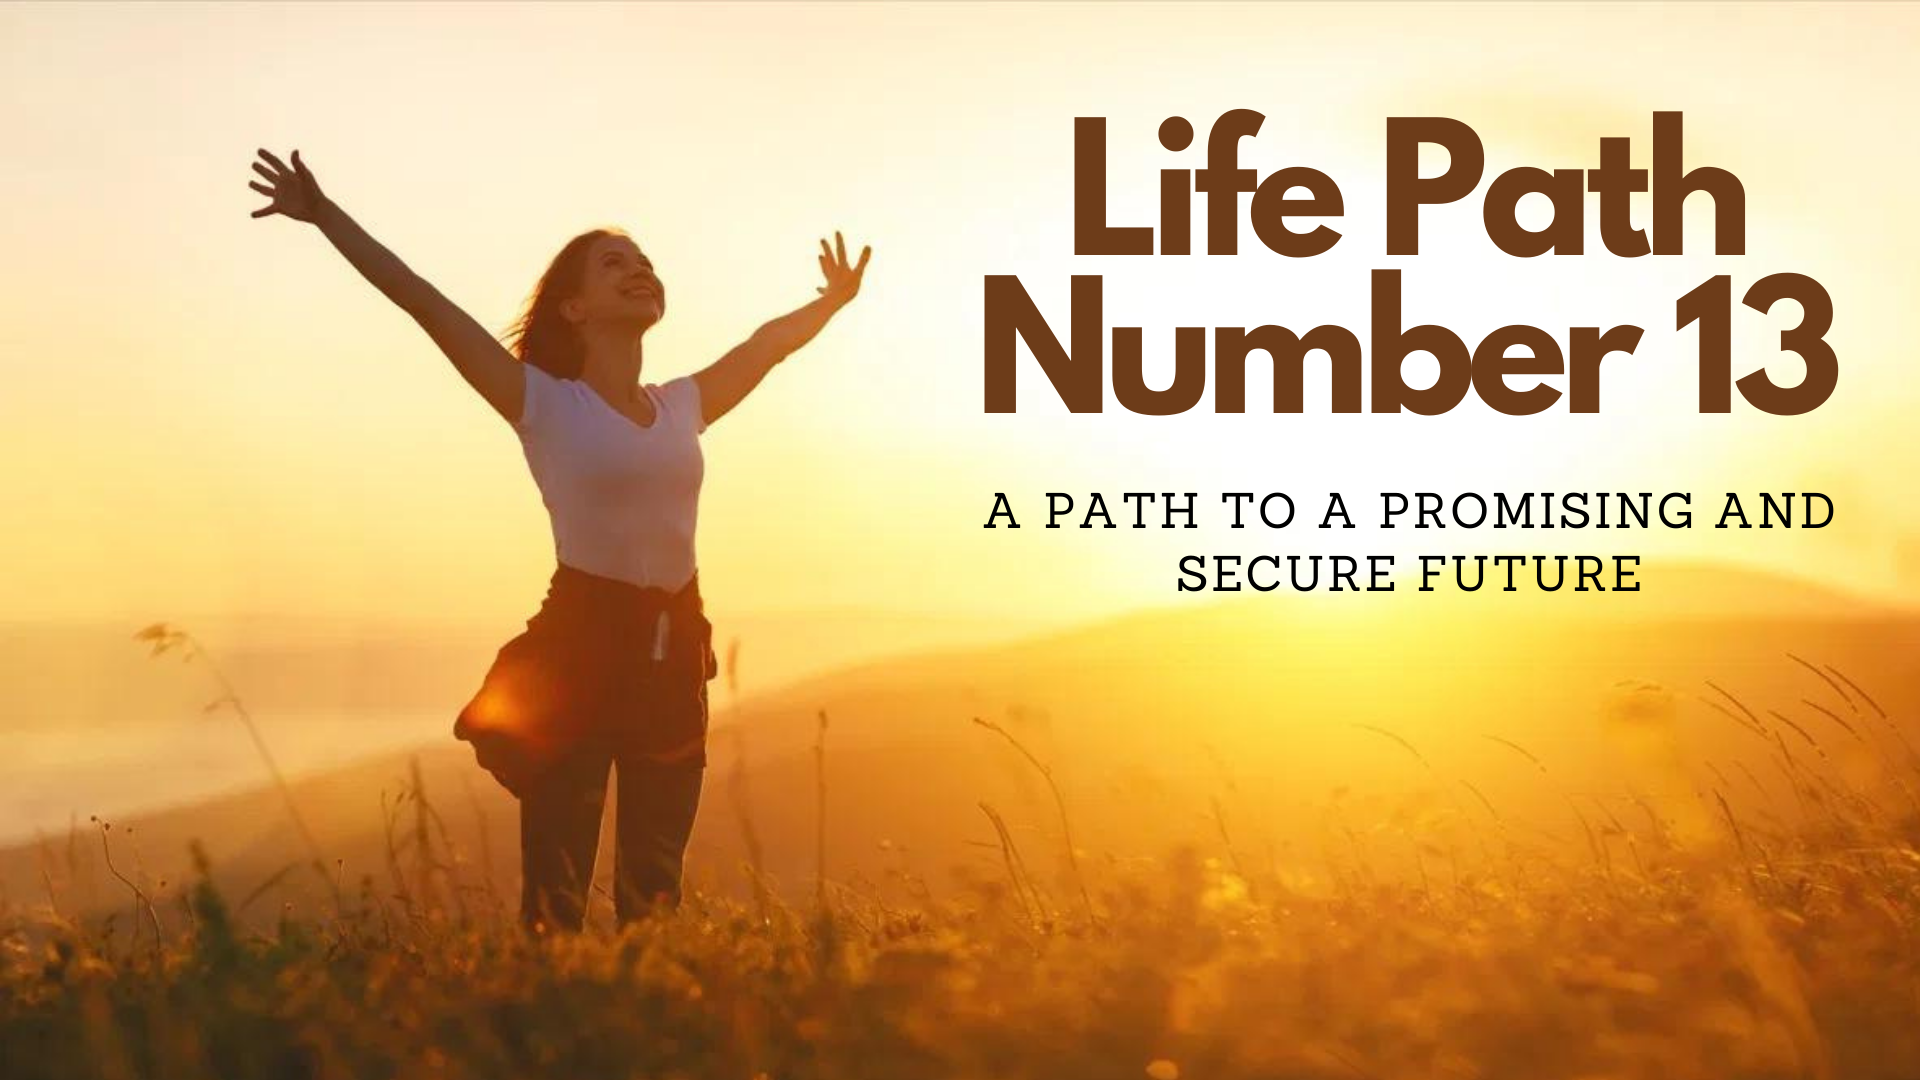 Life Path Number 13 - A Path To A Promising And Secure Future